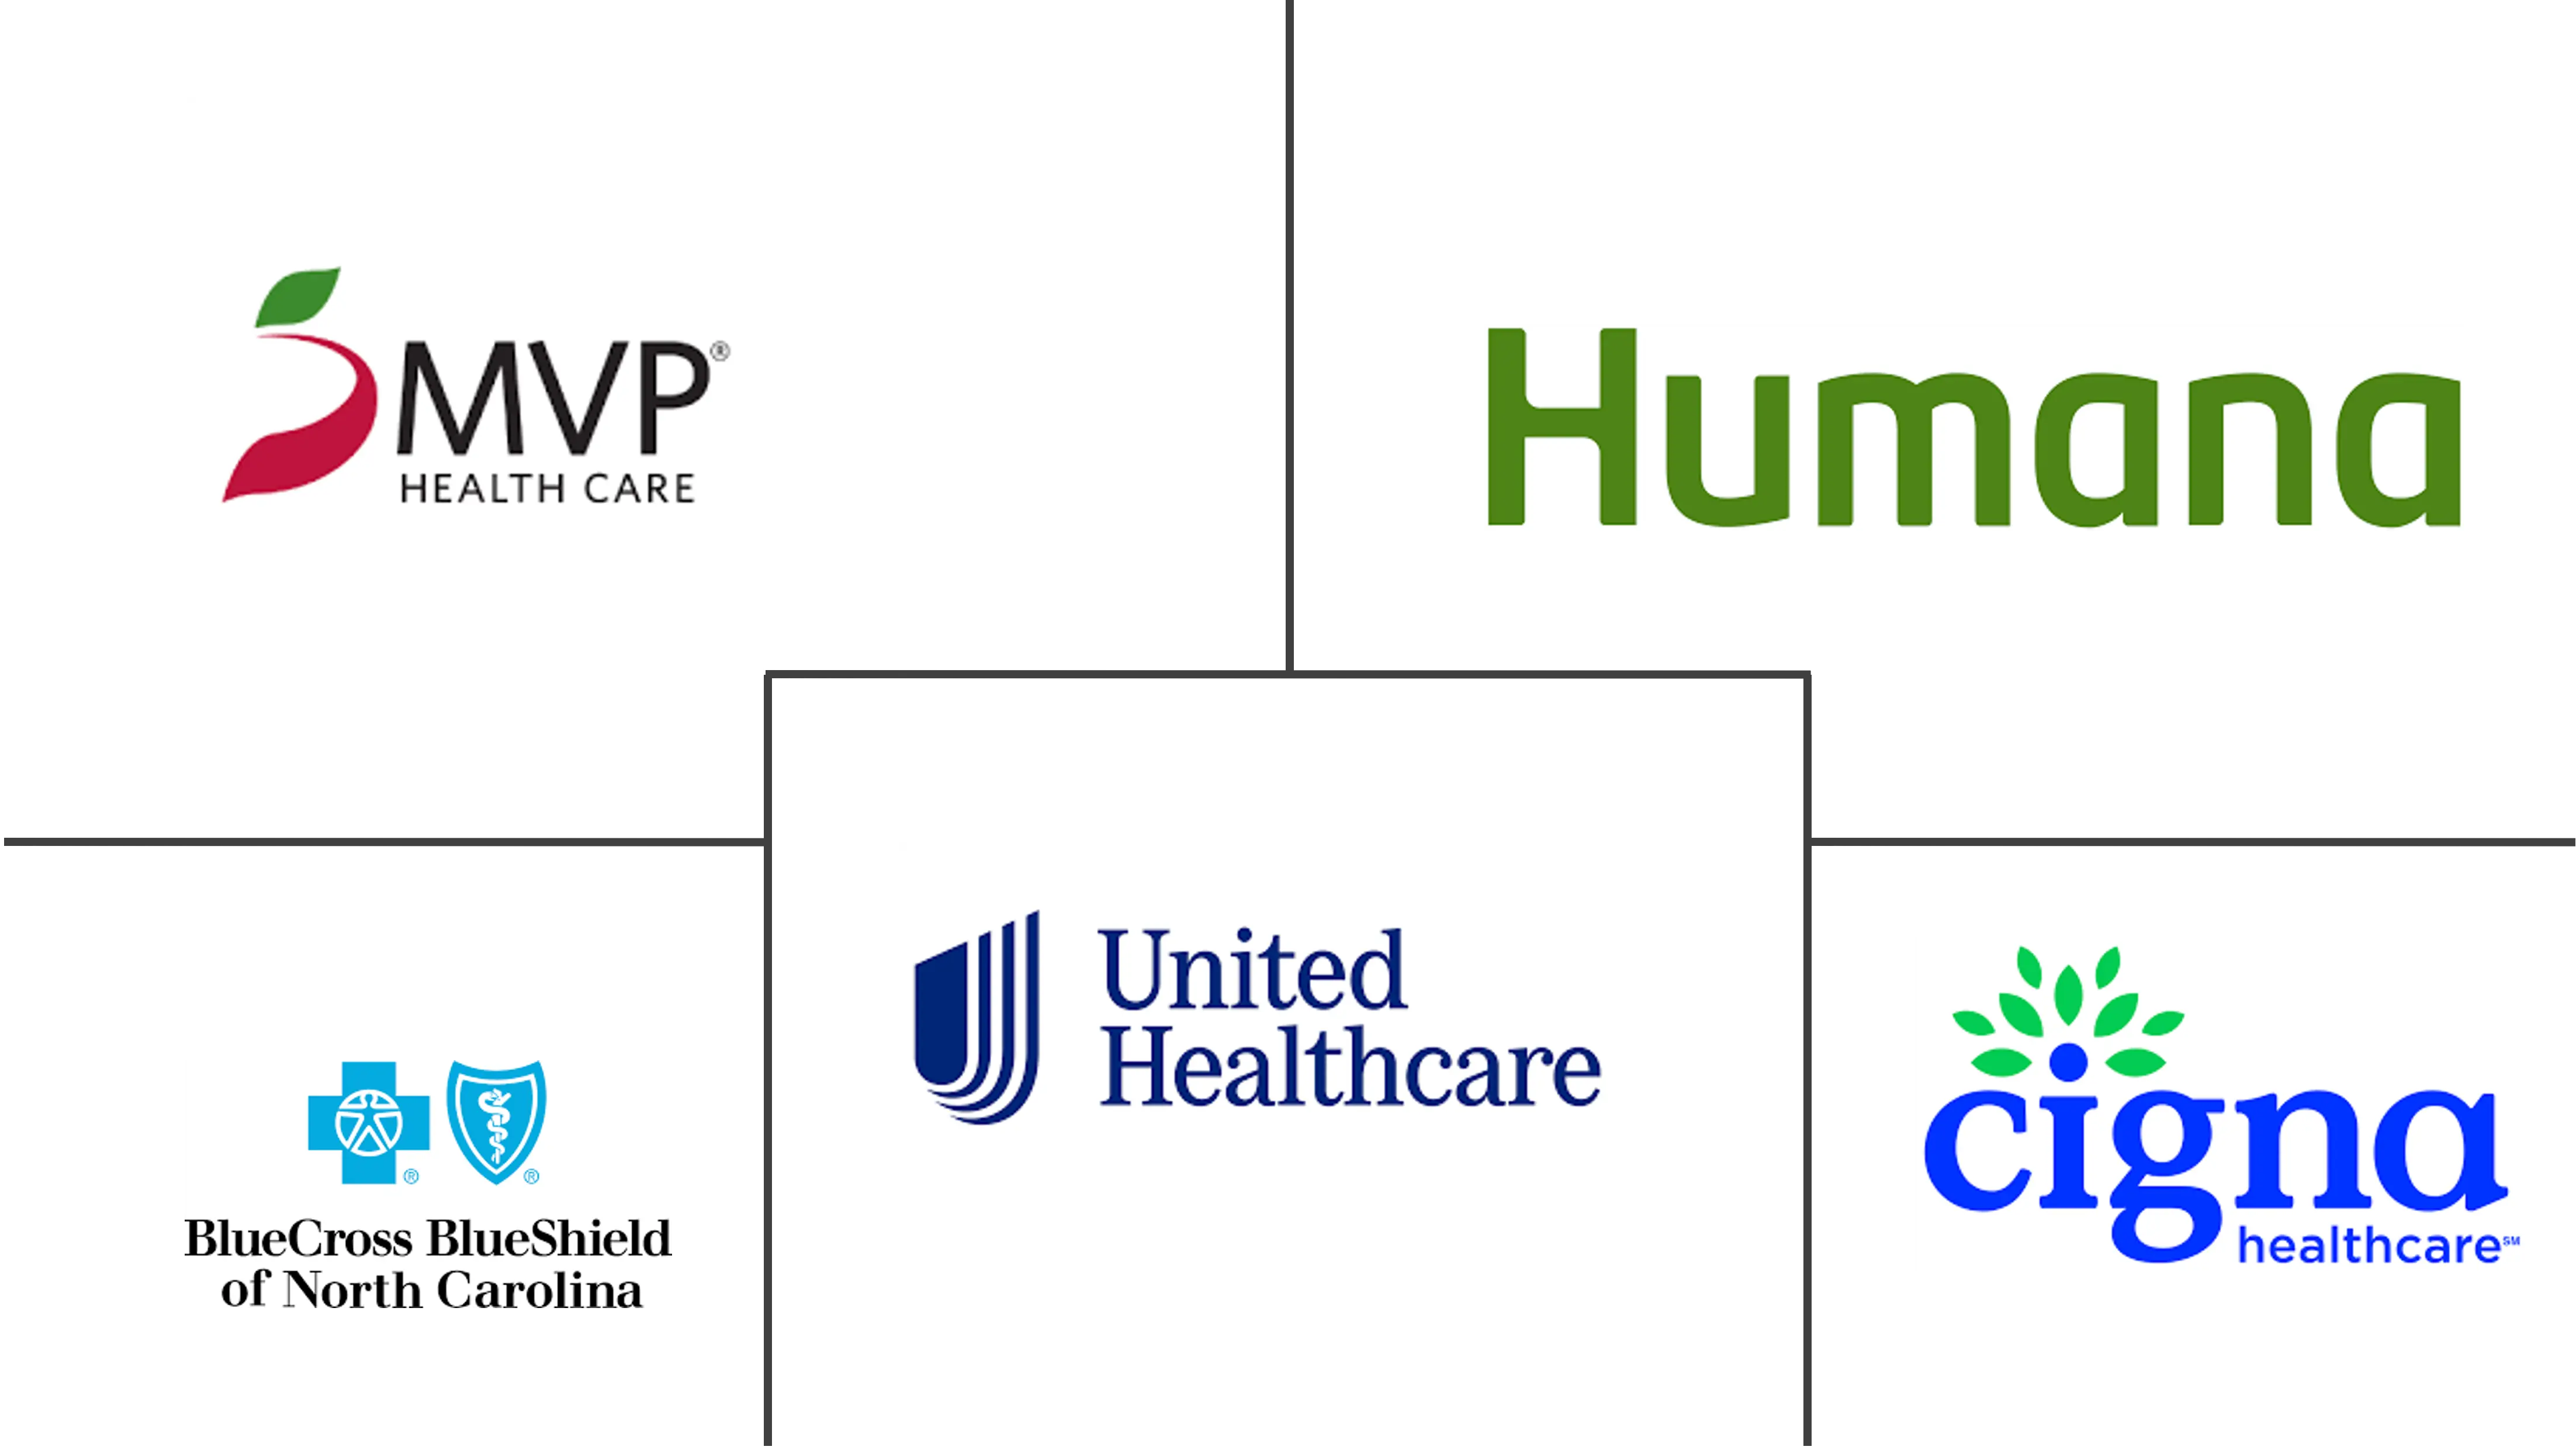 Value-based Healthcare Services Market  Major Players